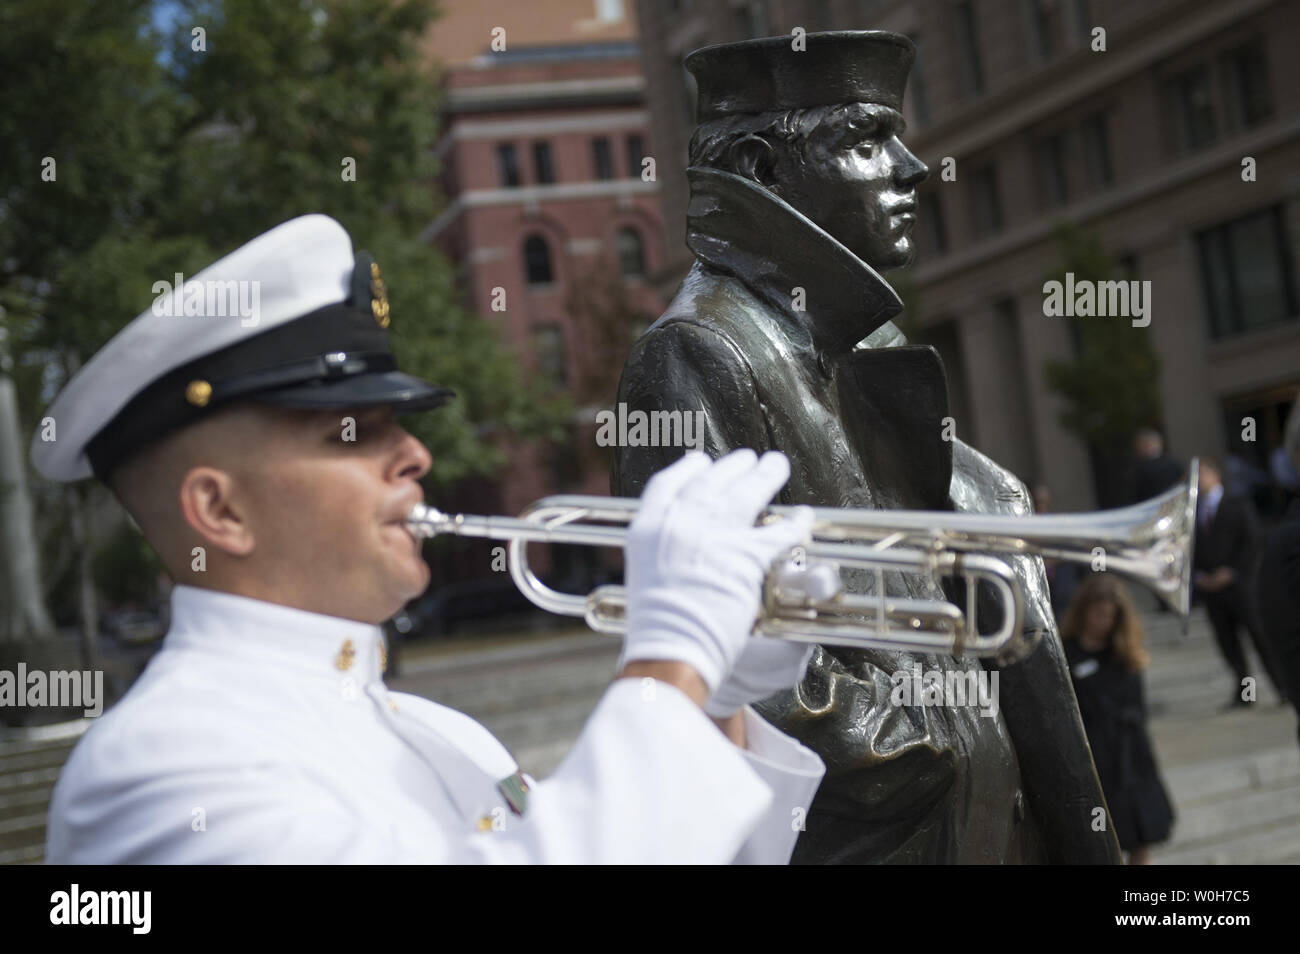 A bugler plays taps during a ceremony at the Navey Memorial where Defense Secretary Chuck Hagel and Chairman of the Joint Chiefs of Staff Gen. Martin Dempsey placed a wreath in honor of the victims of yesterday's Navy Yard shooting, in Washington, D.C. on September 17, 2013. Yesterday morning alleged gunman Aaron Alexis opened fire on the Naval complex killing 12.  UPI/Kevin Dietsch Stock Photo